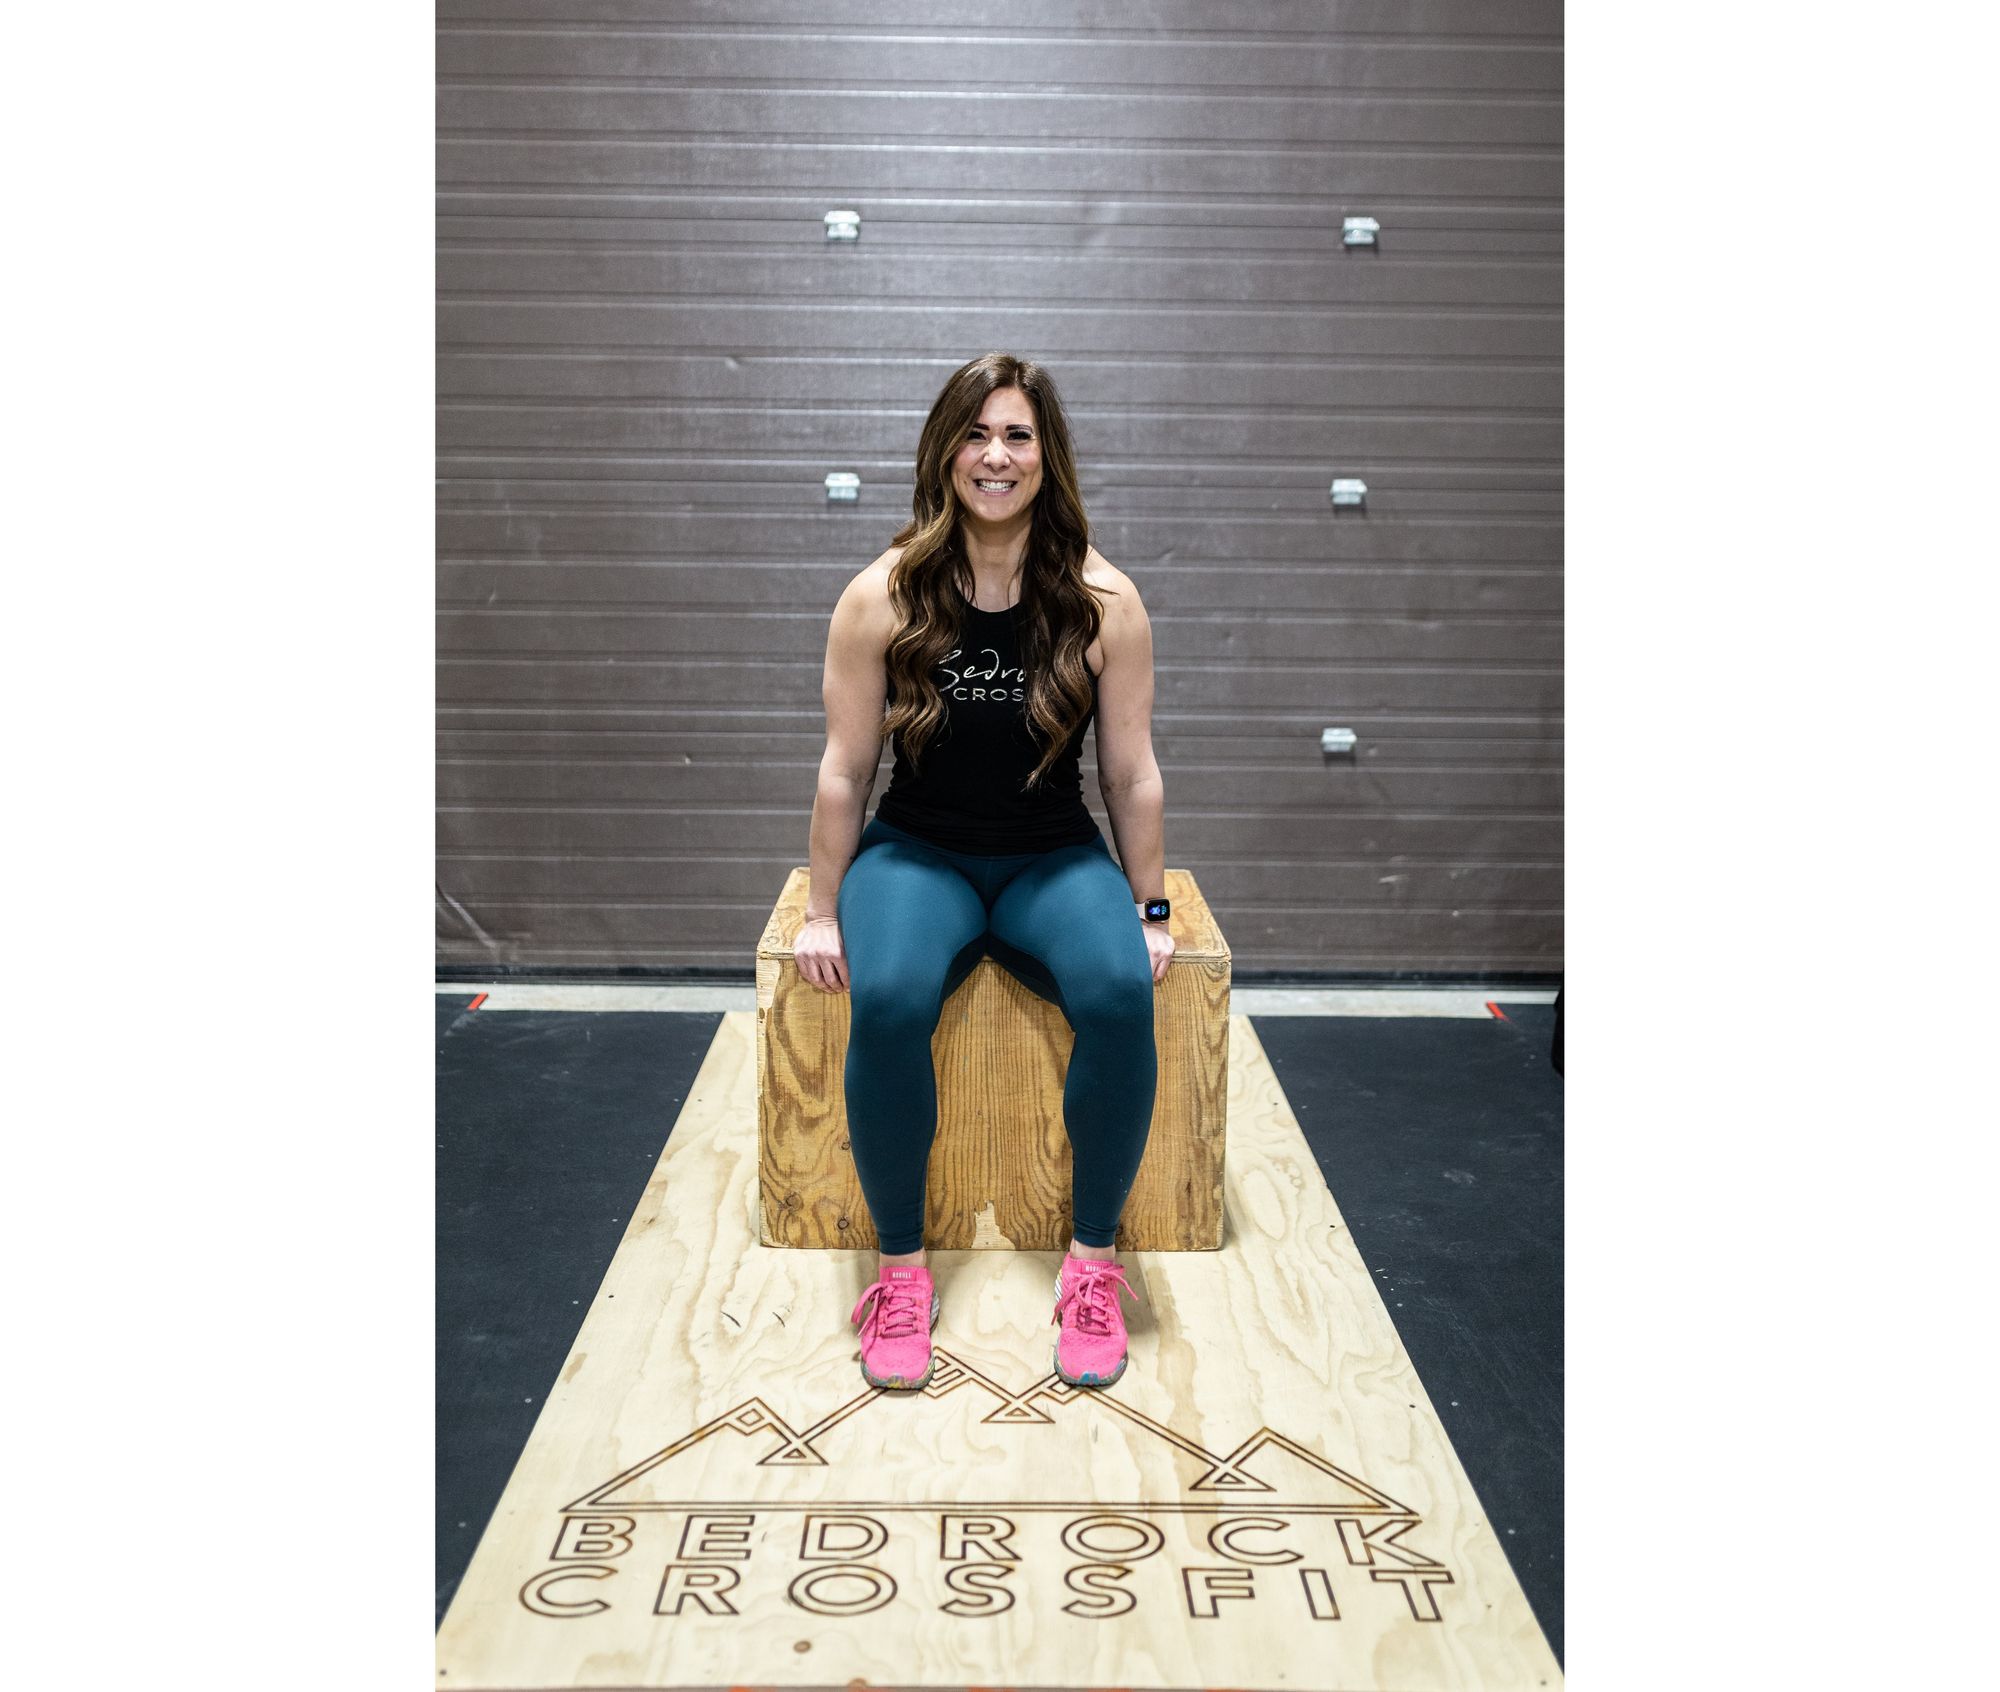 Elevate Yourself, Elevate Others - Bedrock CrossFit